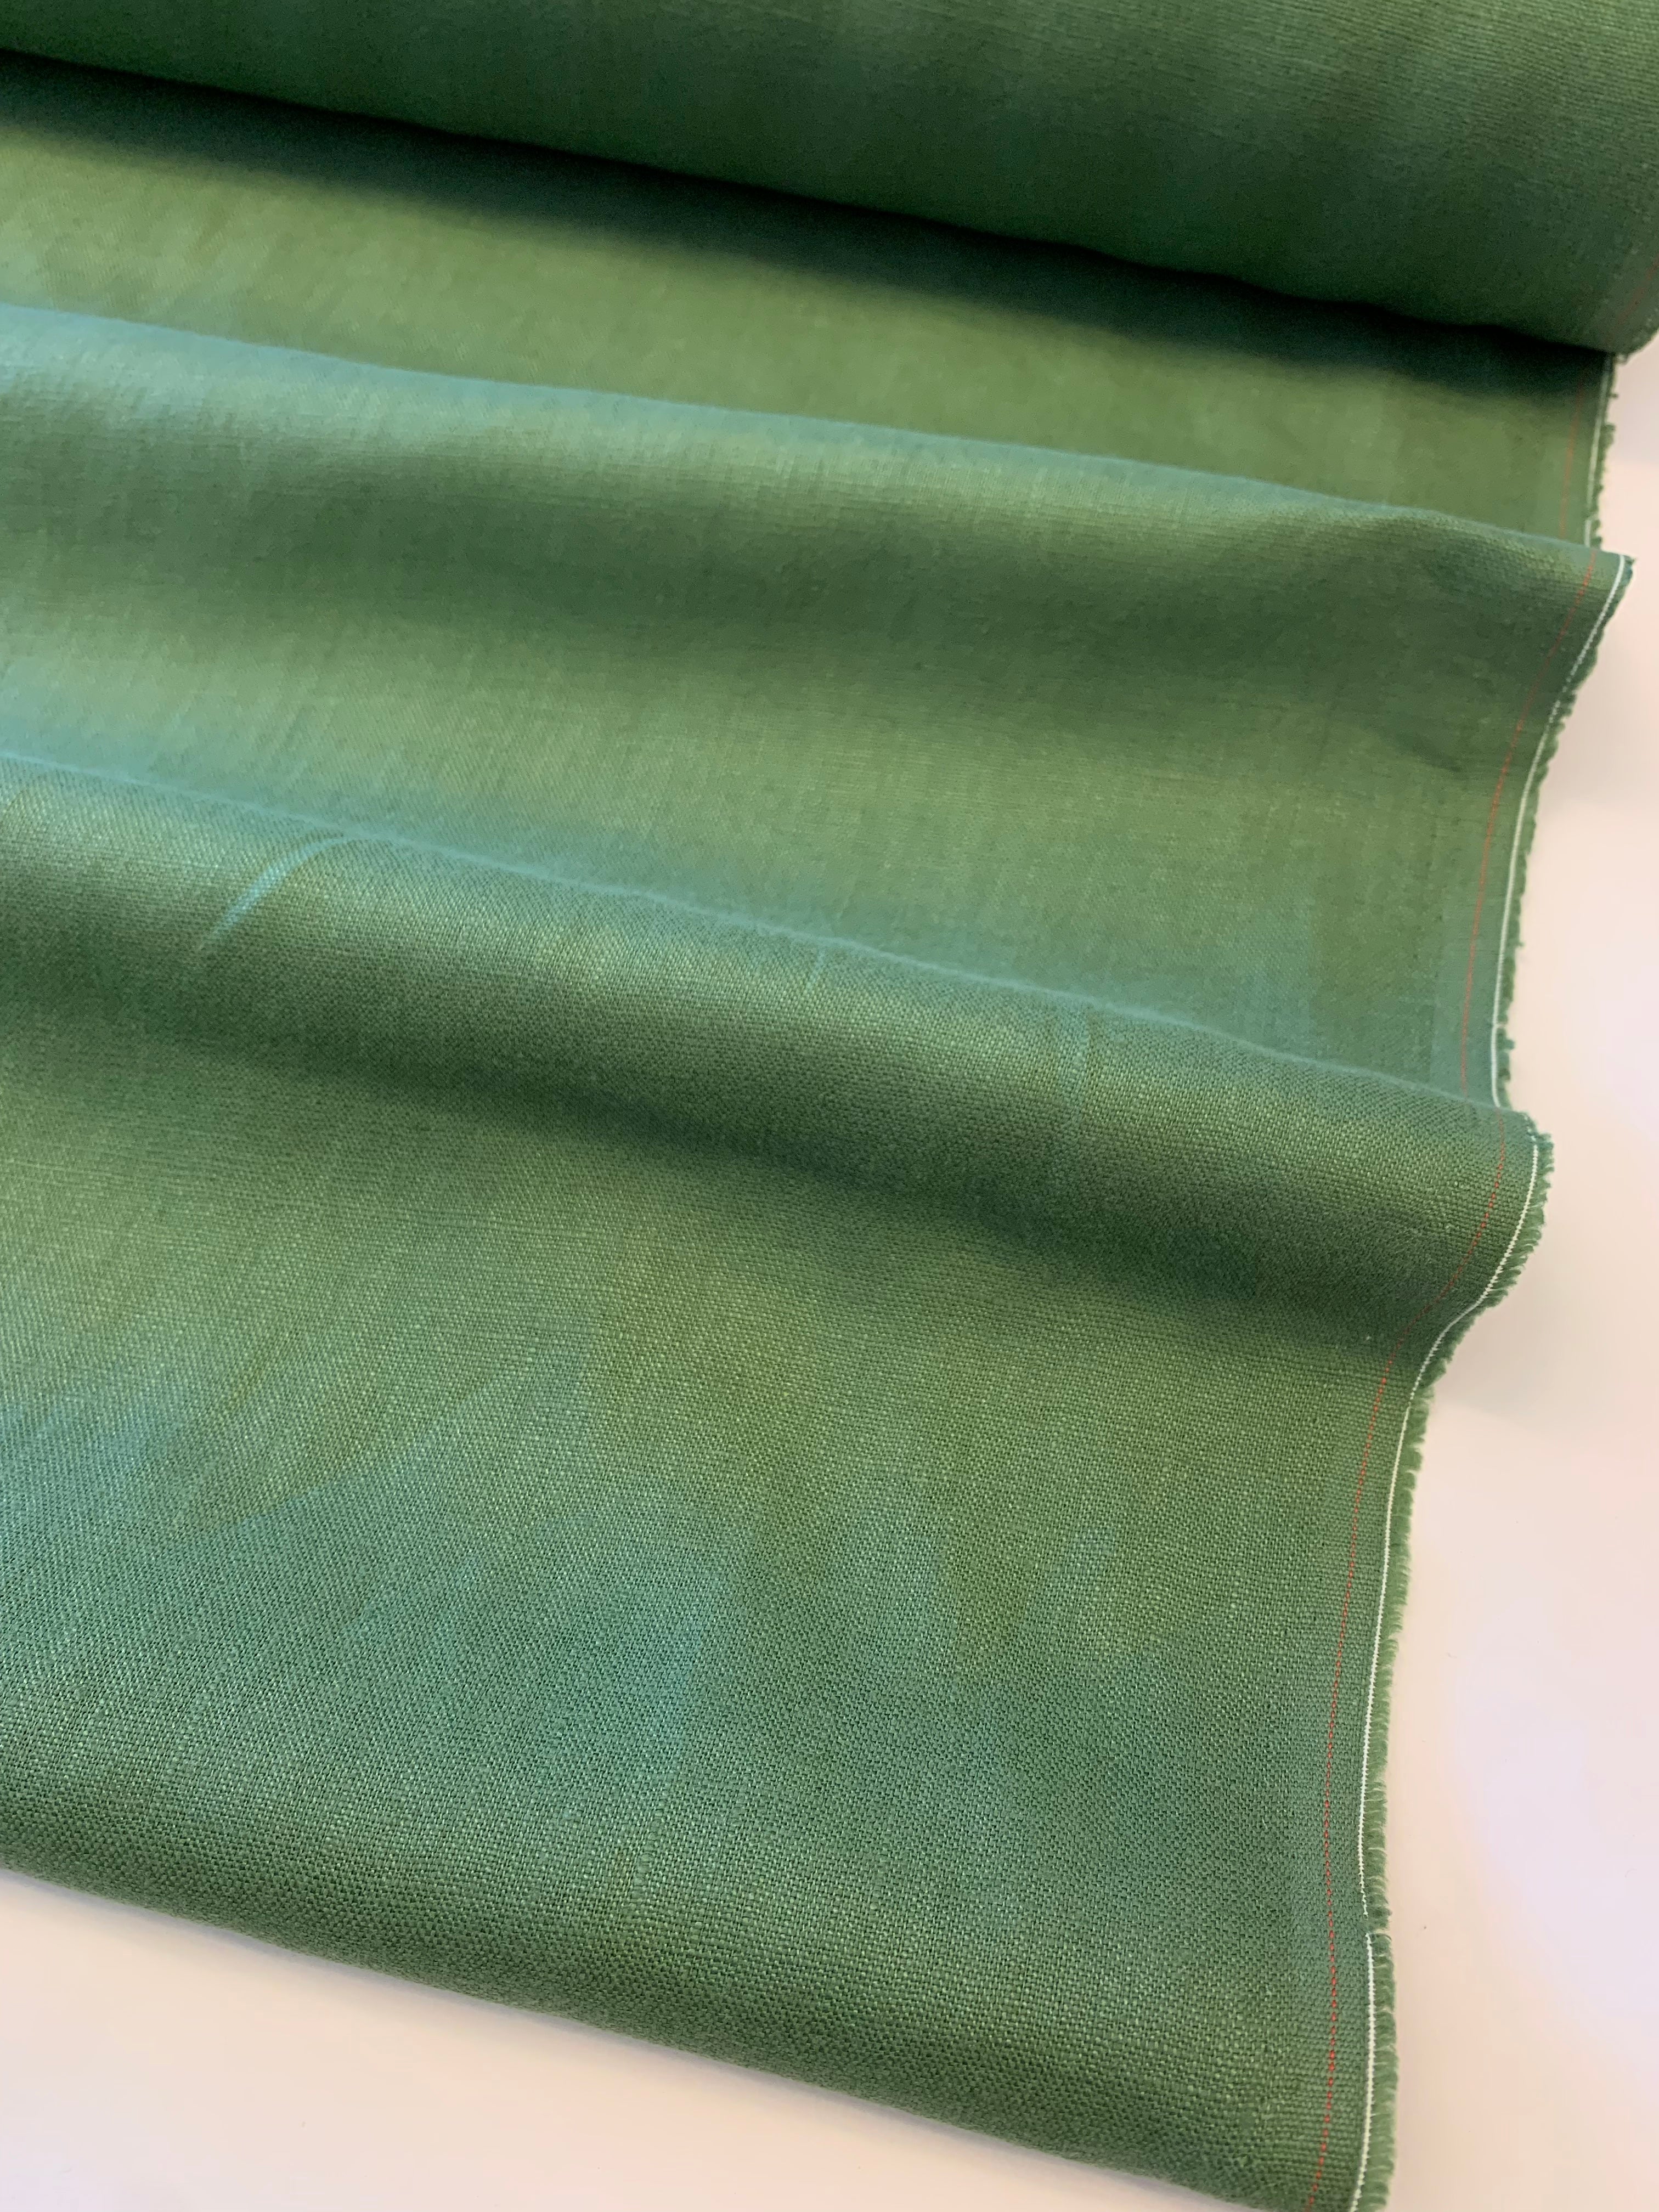 LINDA Mid/heavy weight plain dyed linen: Forest green